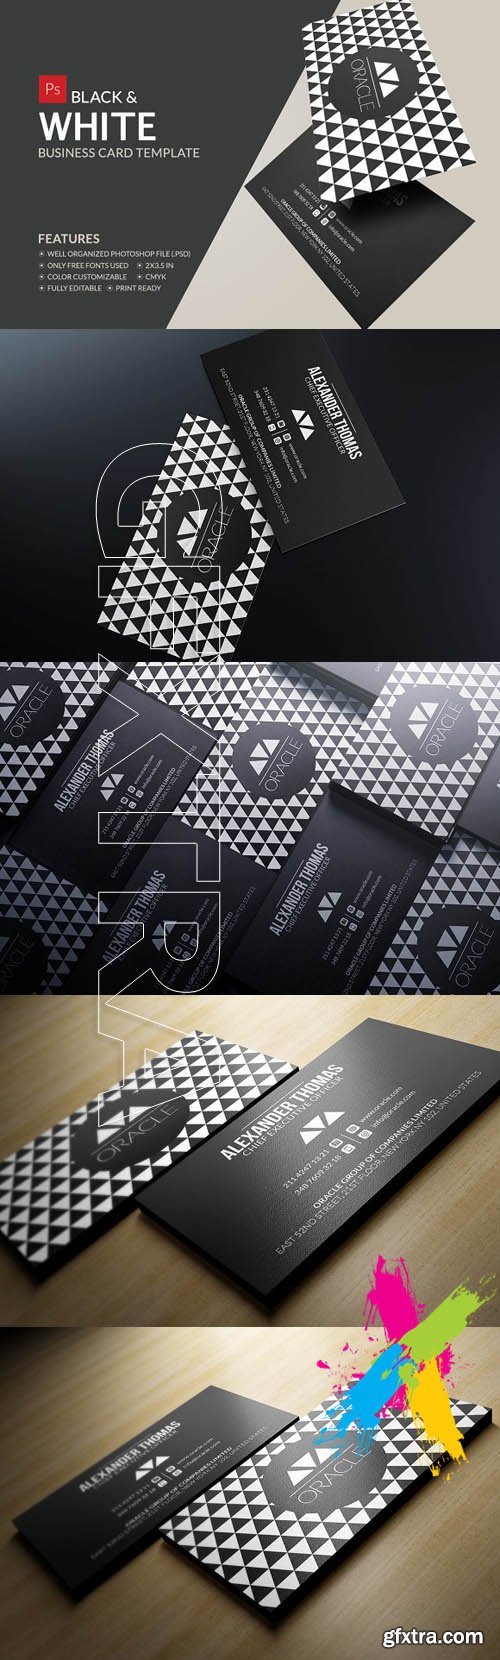 CM Black And White Business Card 1156877